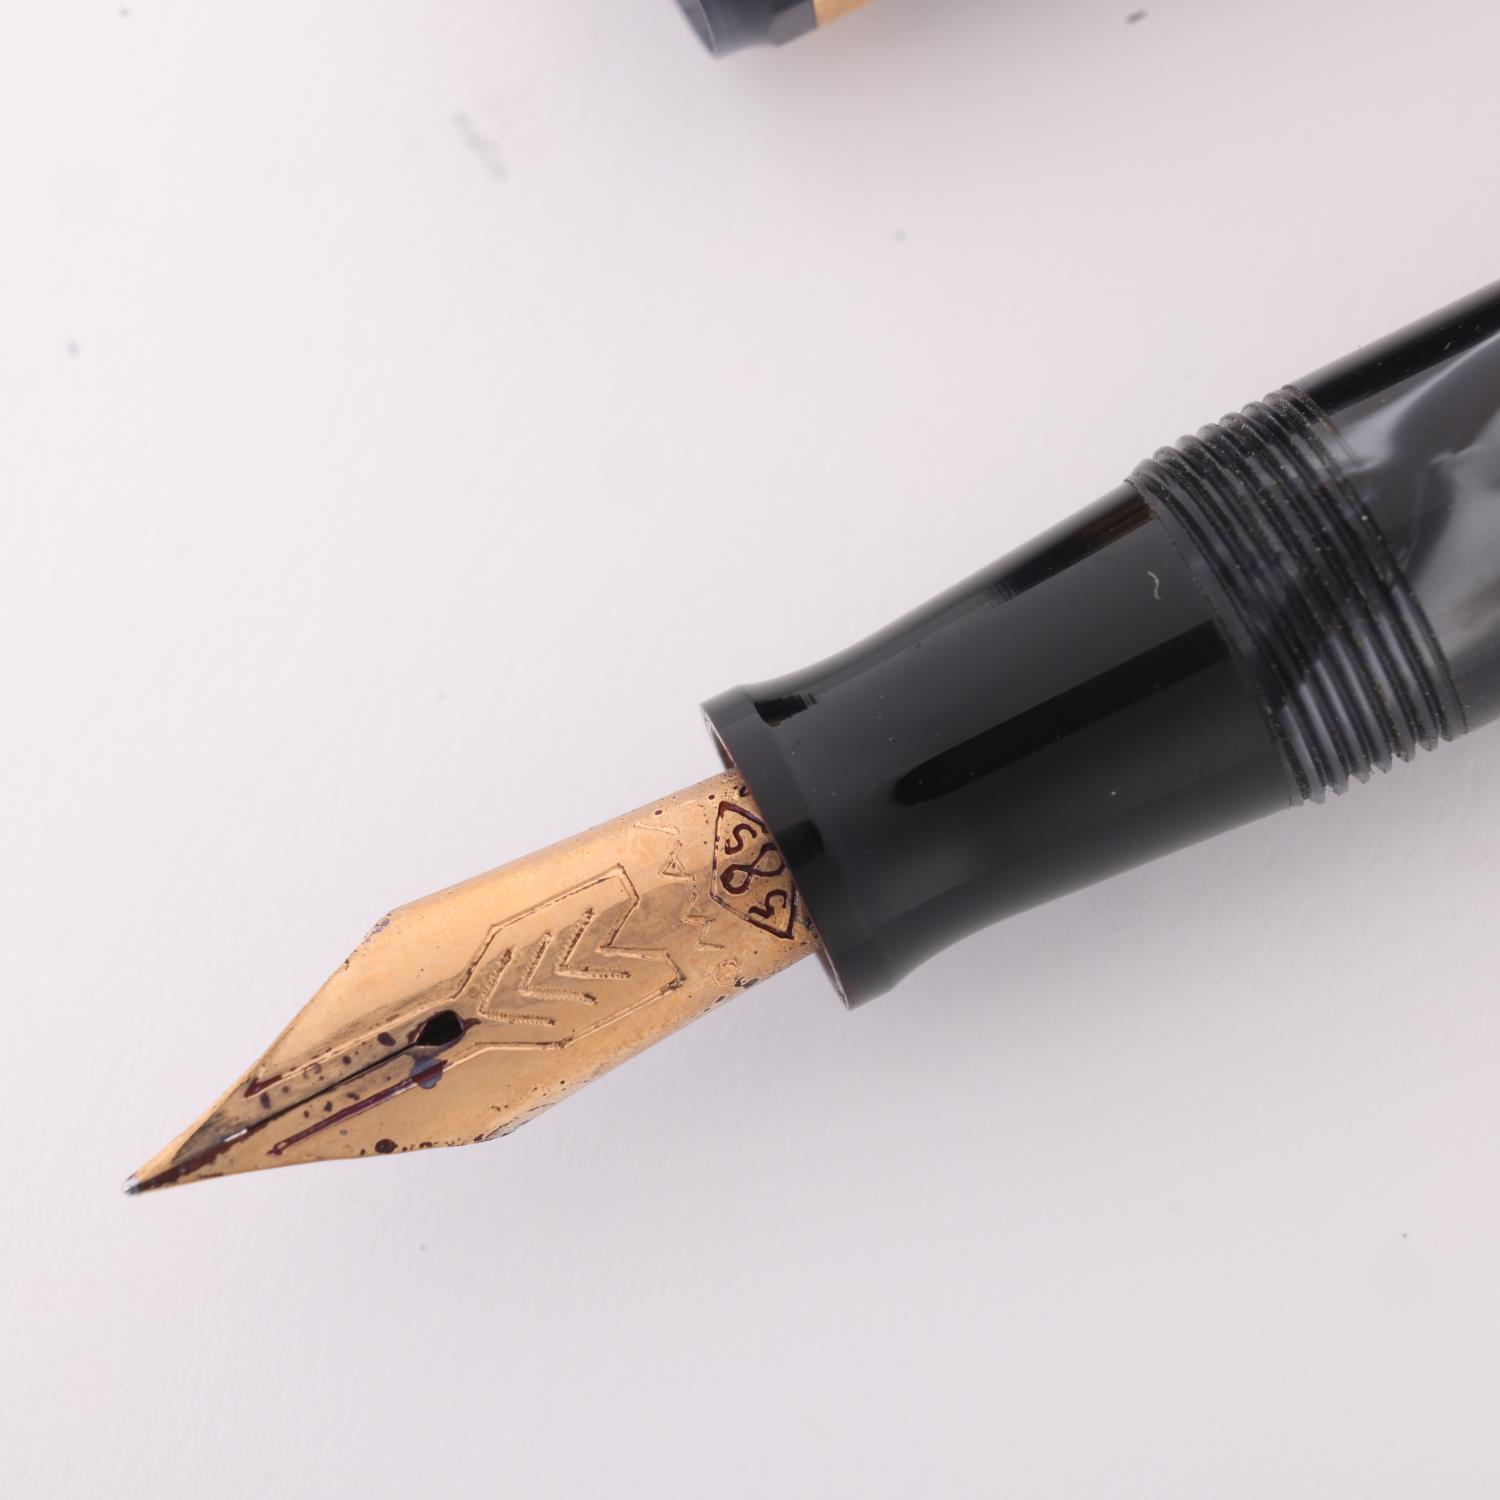 An Omas Dama fountain pen, with 14ct nib and black marbled resin, marked "EXTRA 445846 - Image 2 of 4